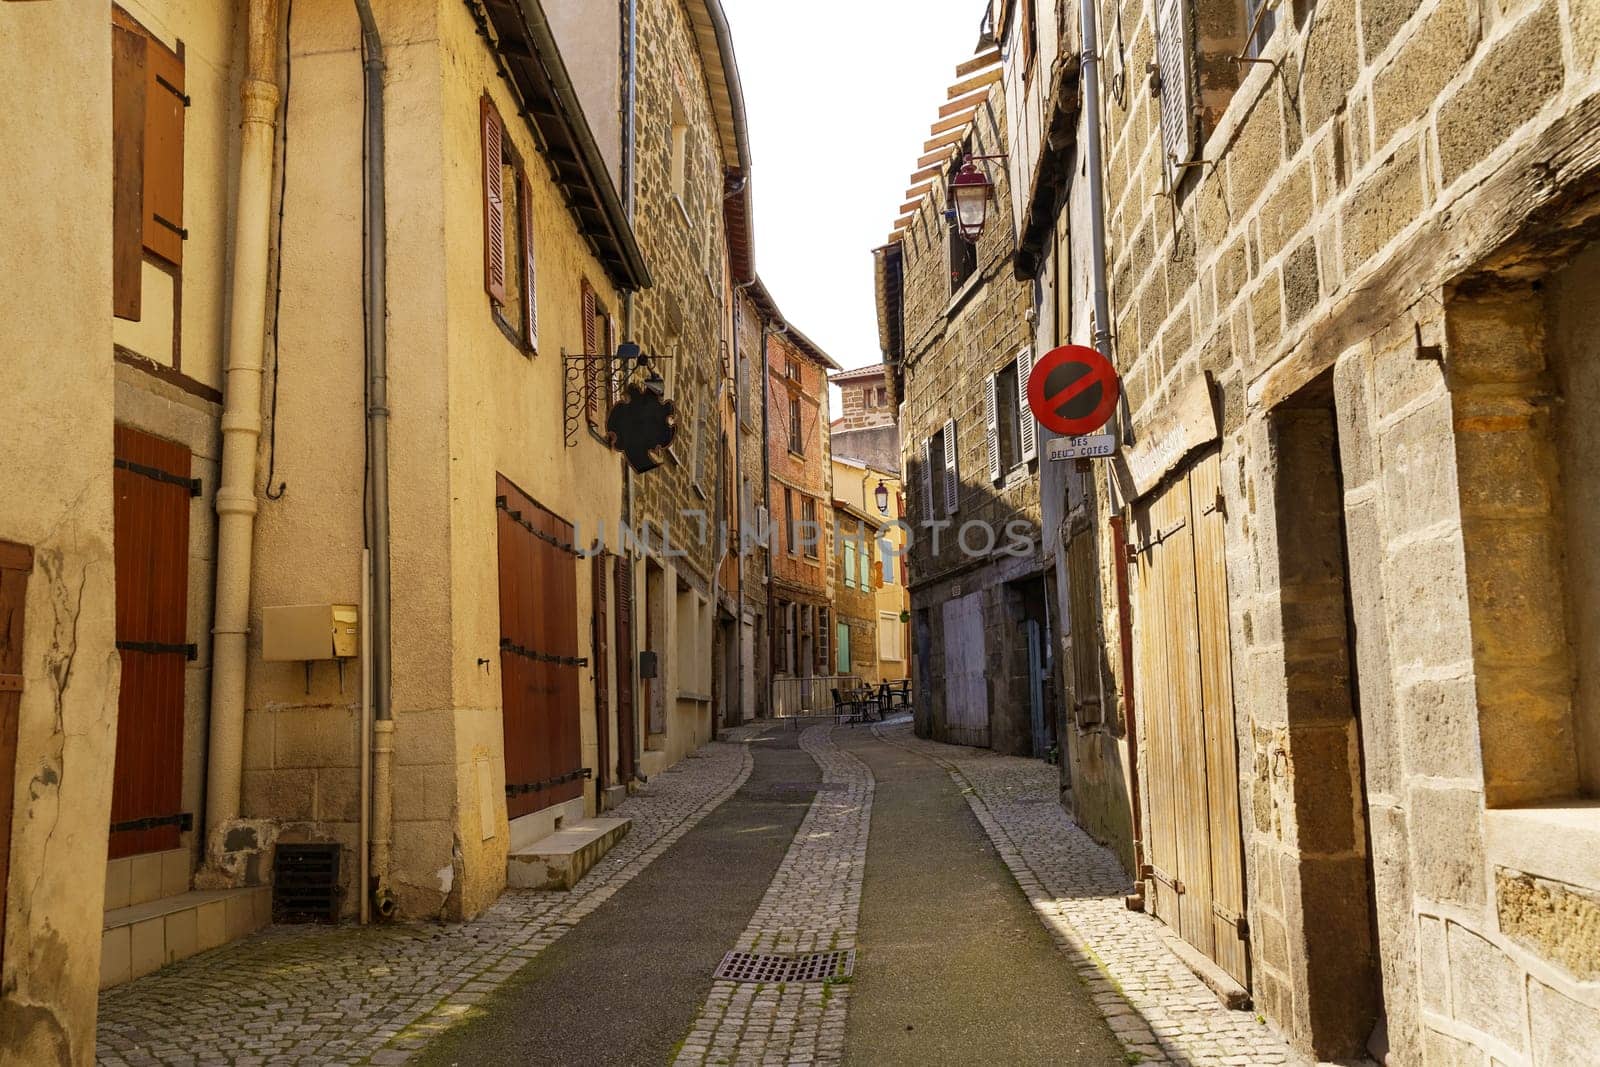 A narrow street with a stop sign positioned in the middle of it, creating a point of pause for vehicles traveling through the urban area.